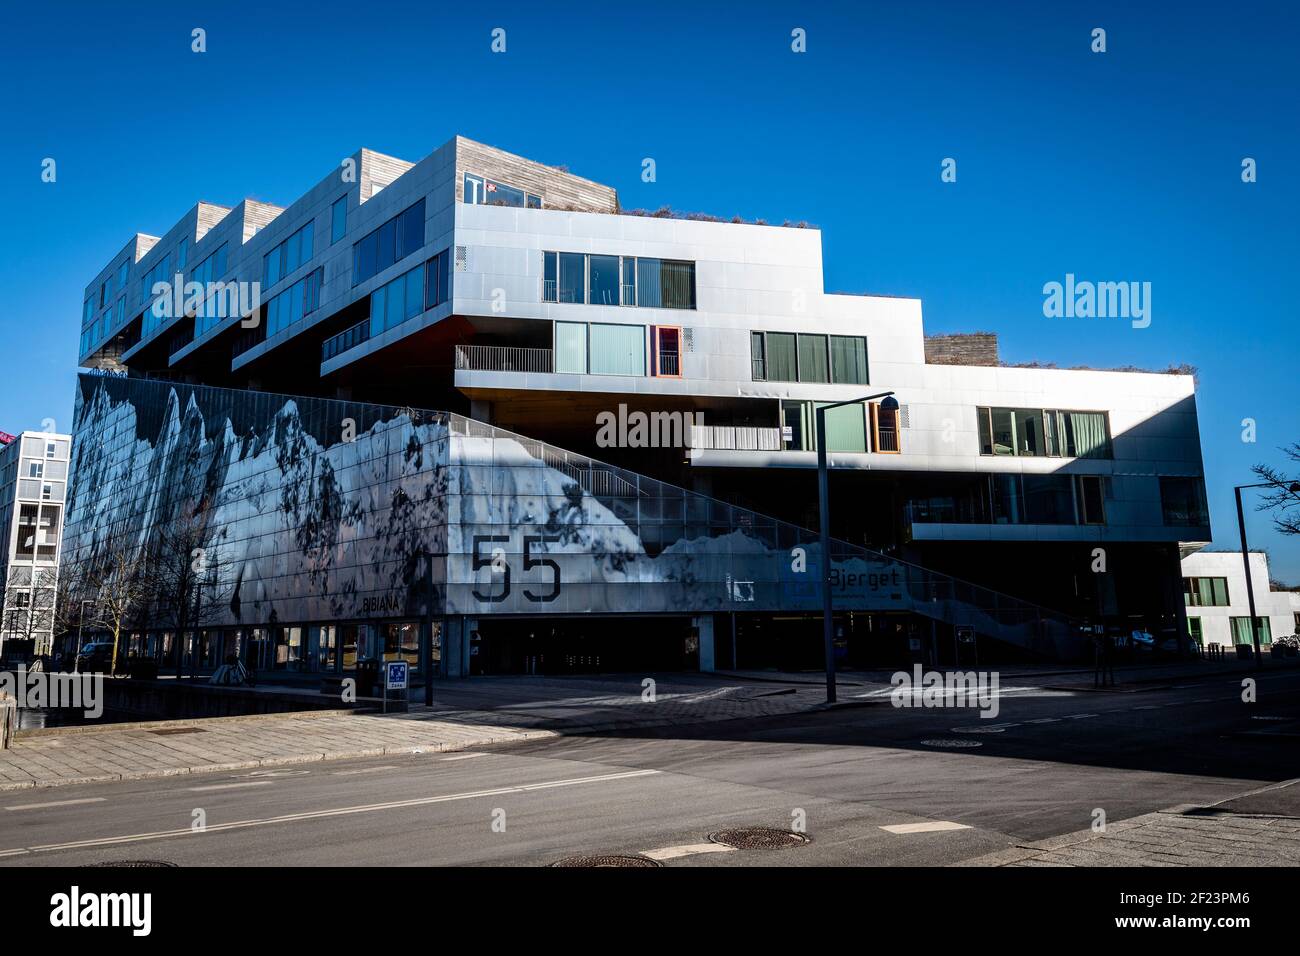 Mountain Dwellings (Danish: Bjerget) is a building in the Ørestad district of Copenhagen, Denmark, consisting of apartments above a multi-story car pa Stock Photo